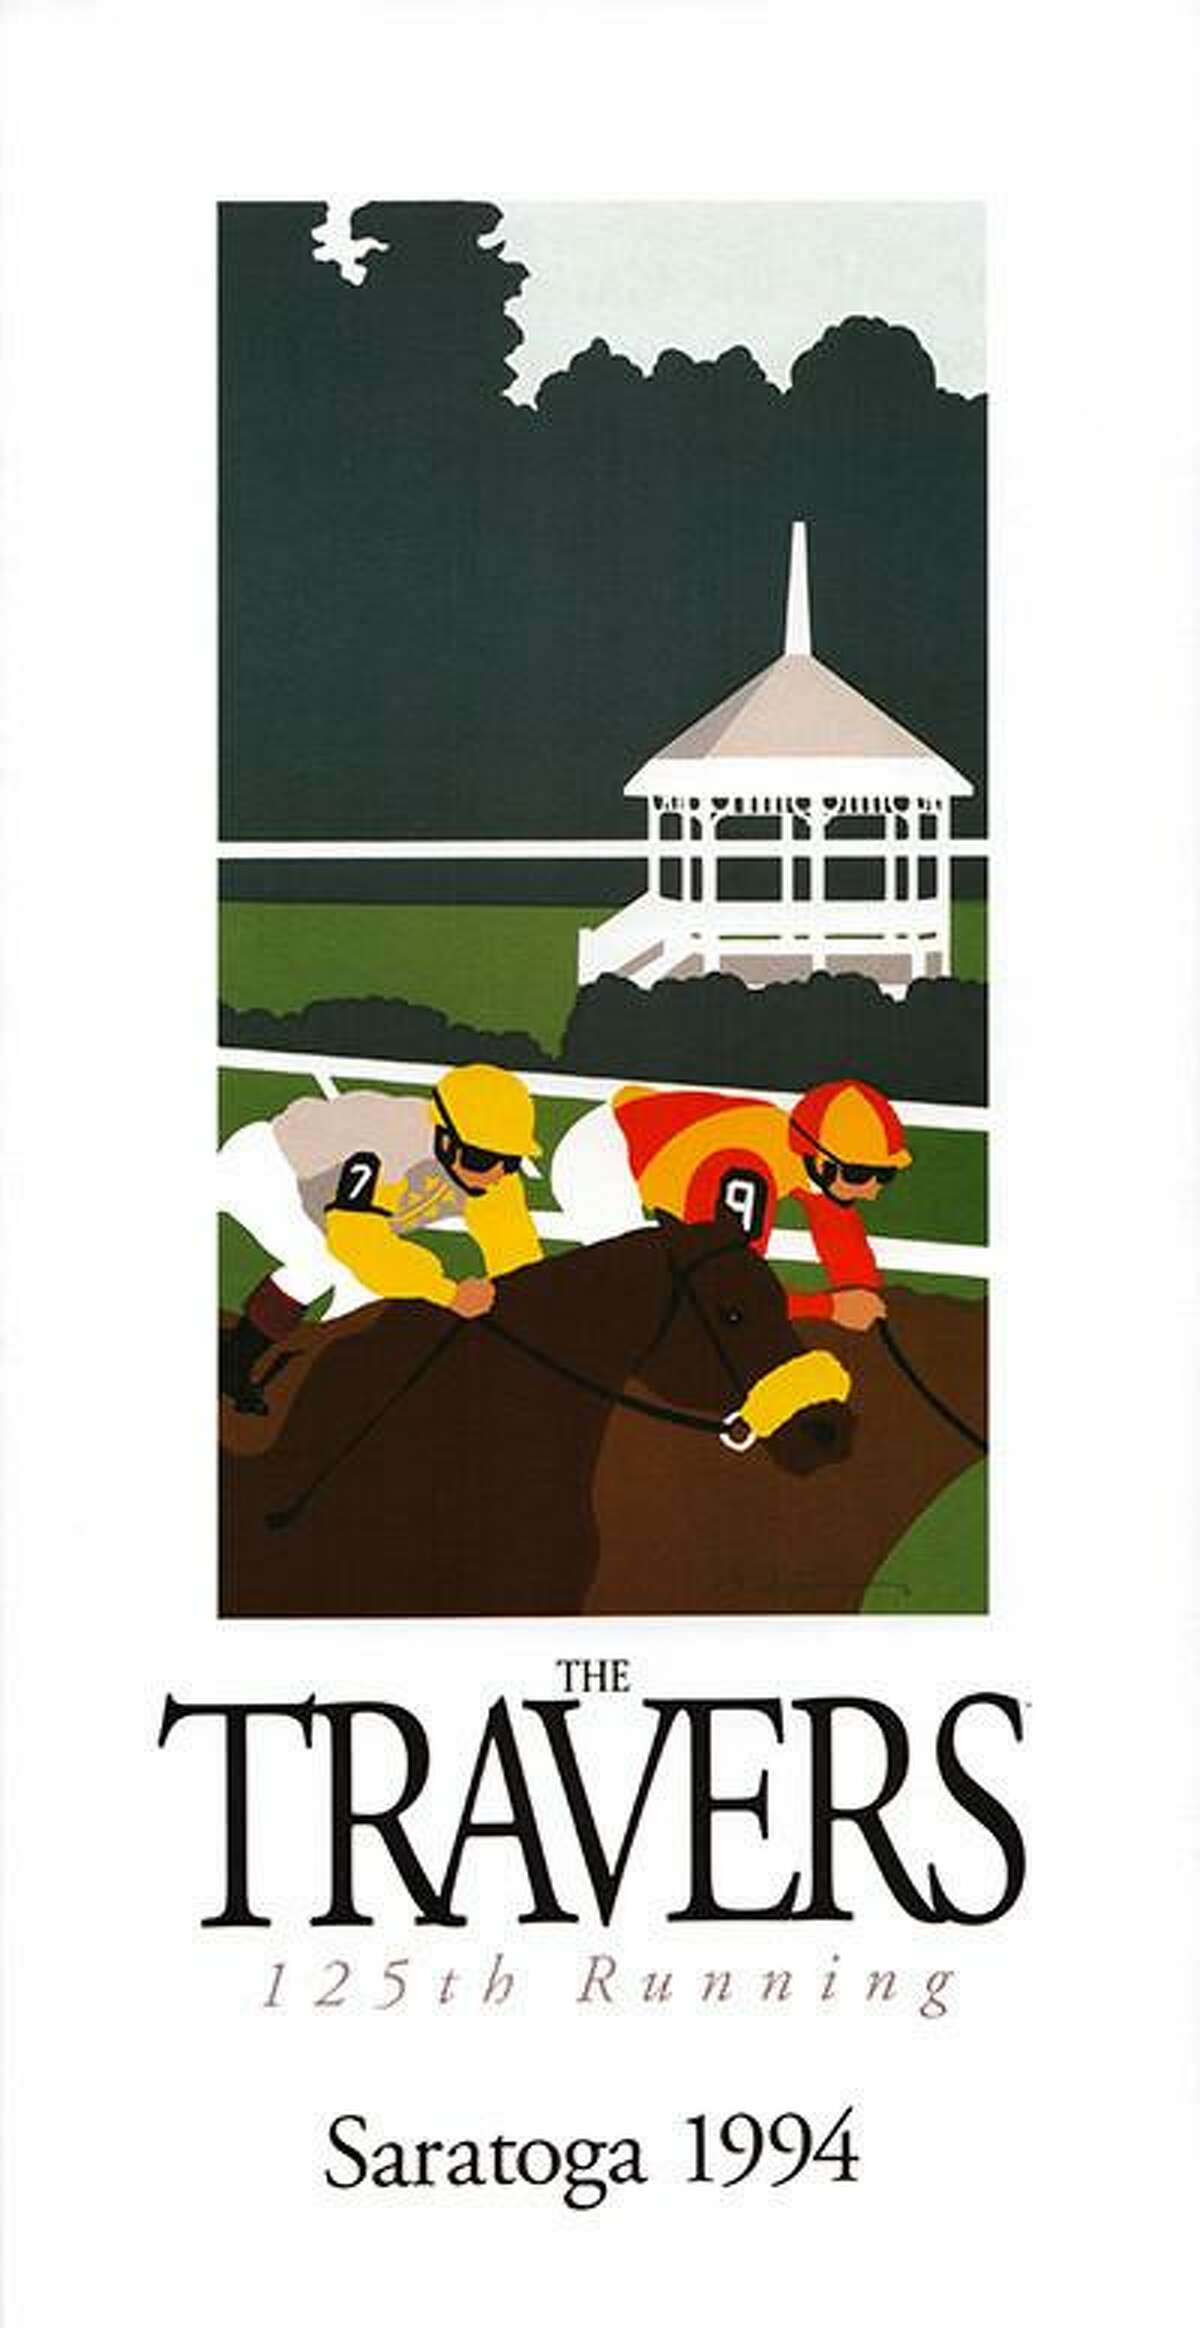 Travers posters through the years